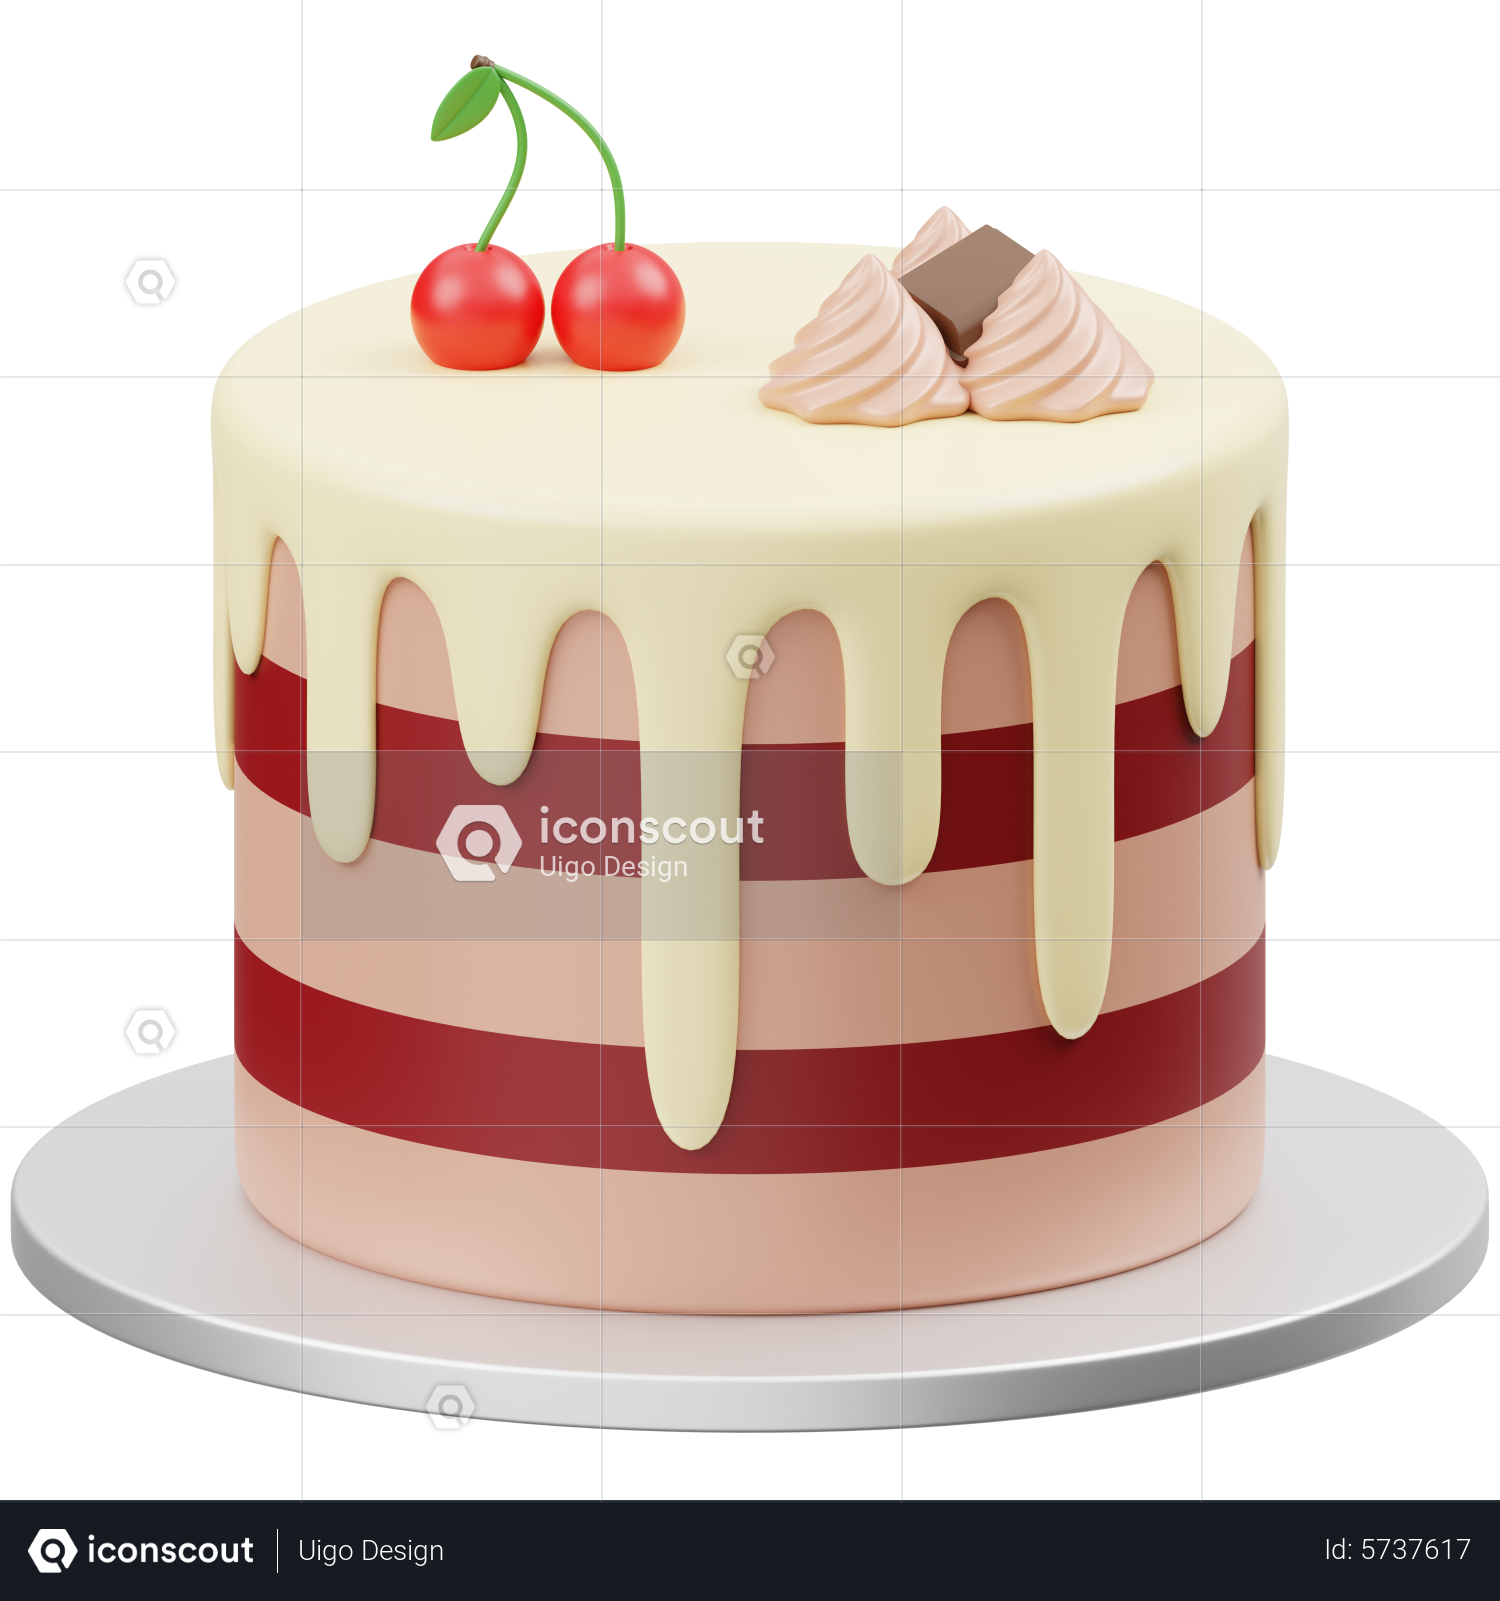 Cake 24 by 3DRivers 3D Model $20 - .obj .max .3ds - Free3D